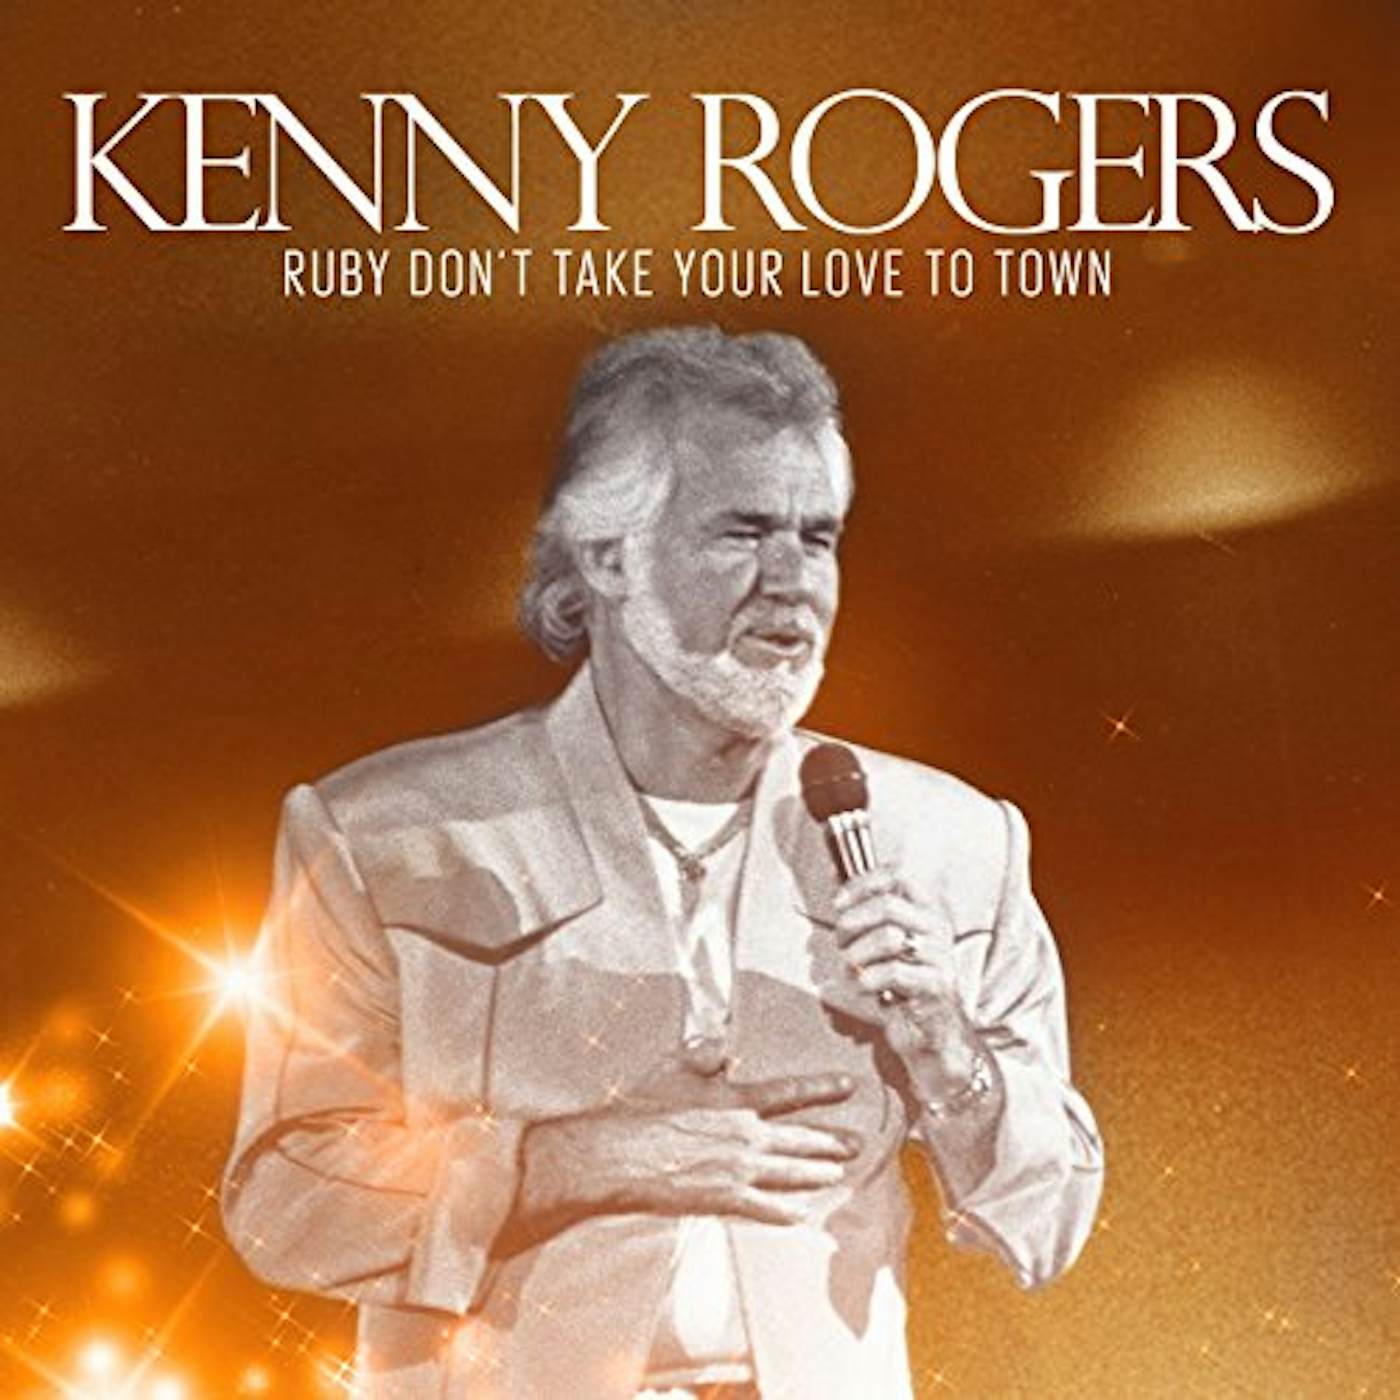 Kenny Rogers RUBY DON'T TAKE YOUR LOVE TO TOWN CD